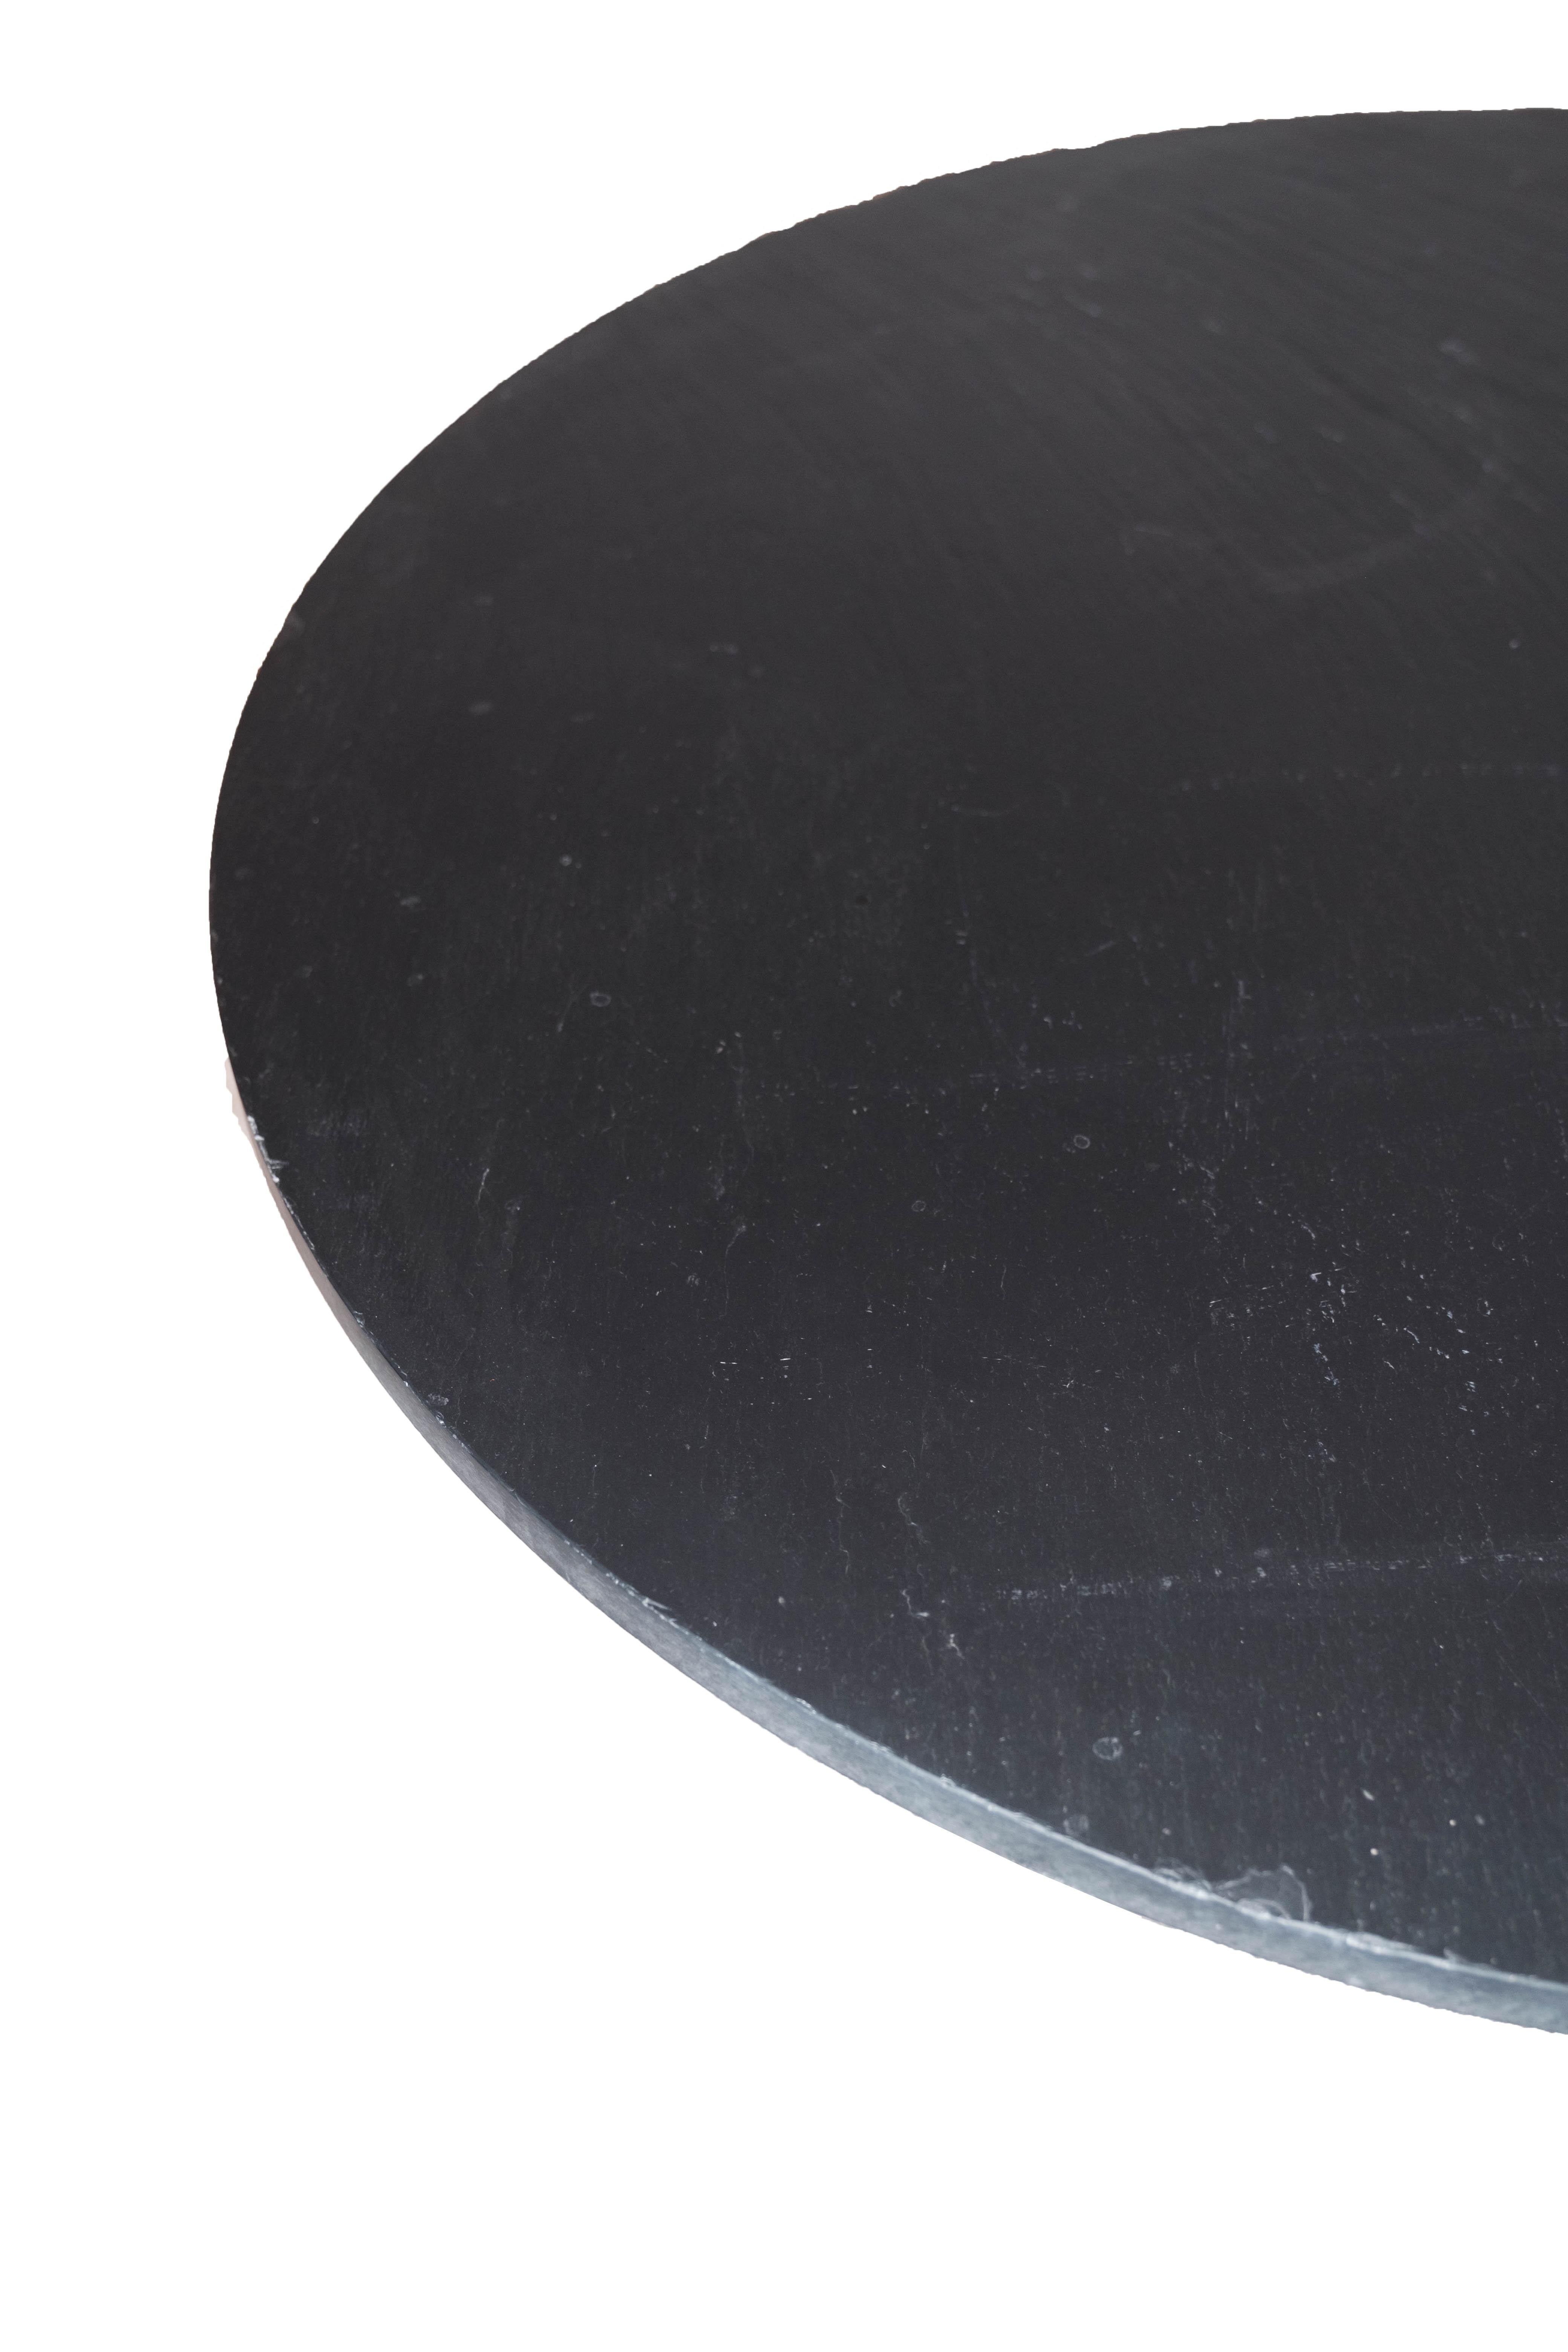 Metal Round Coffee Table With Black Slate Plate By Sigurd Ressell Falcon From 1960s For Sale